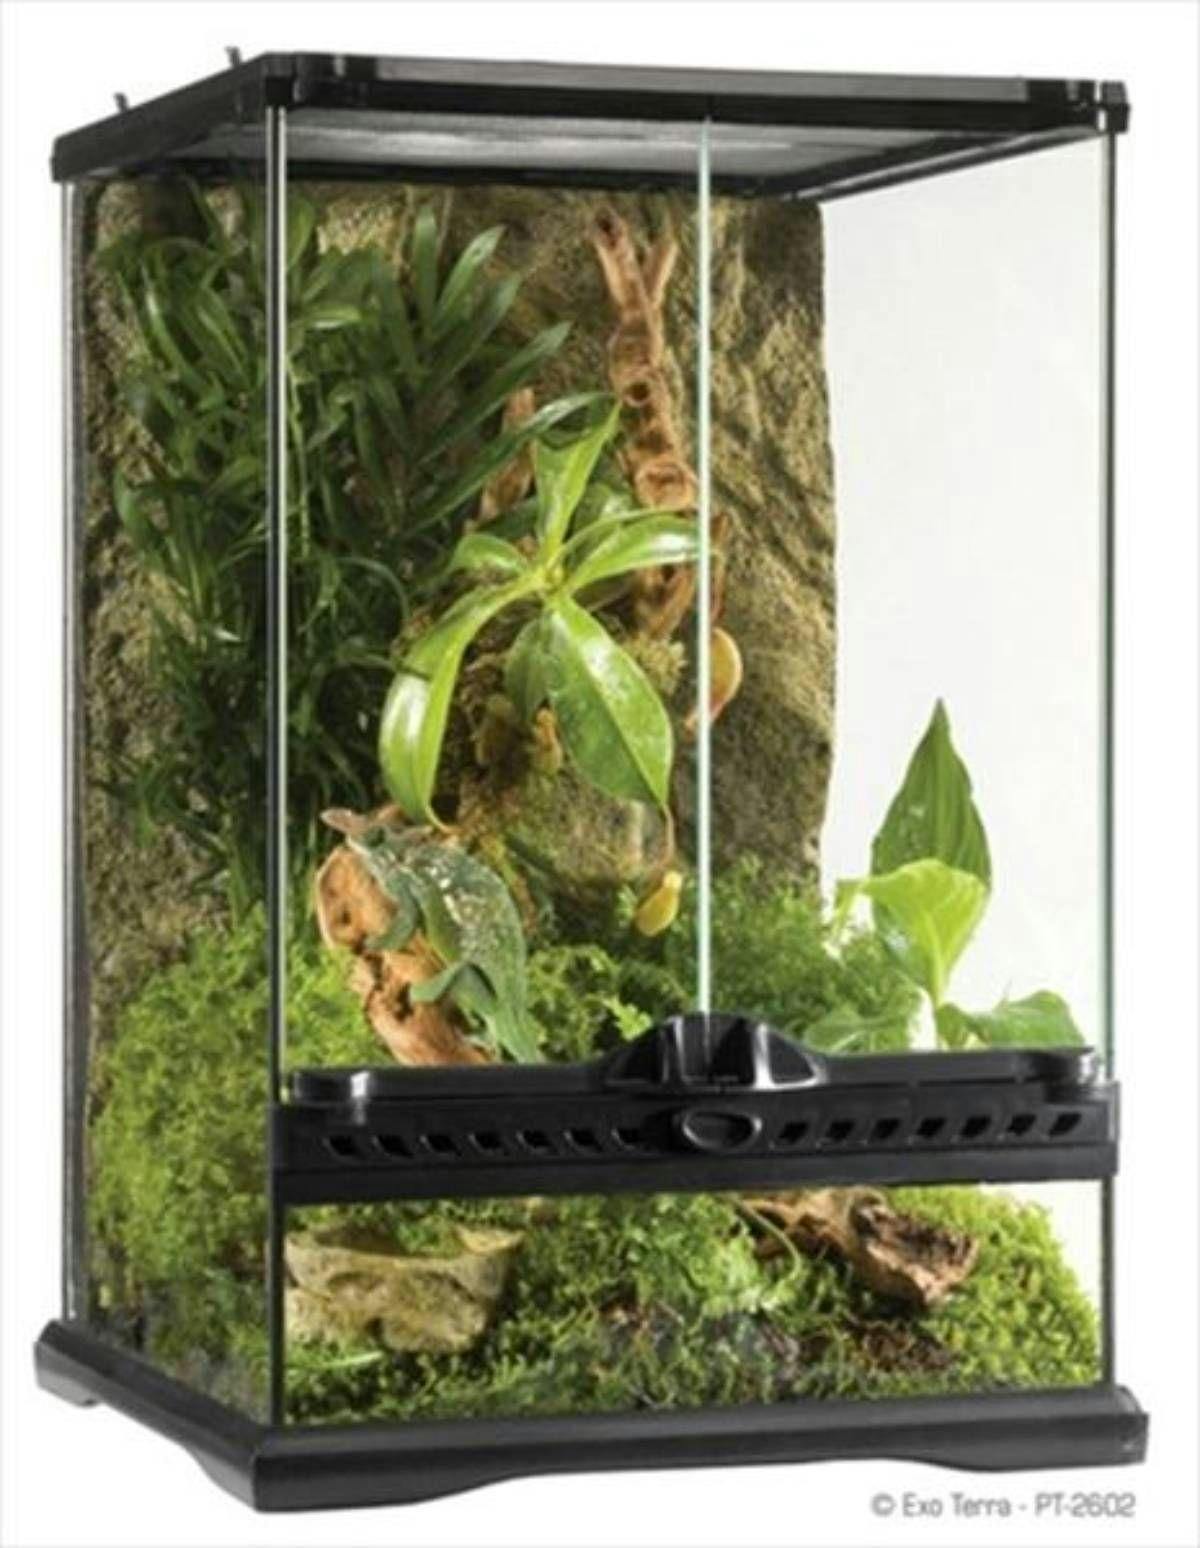 Image for Exo Terra Glass Terrarium 18”x18”x24” by Josh's Frogs